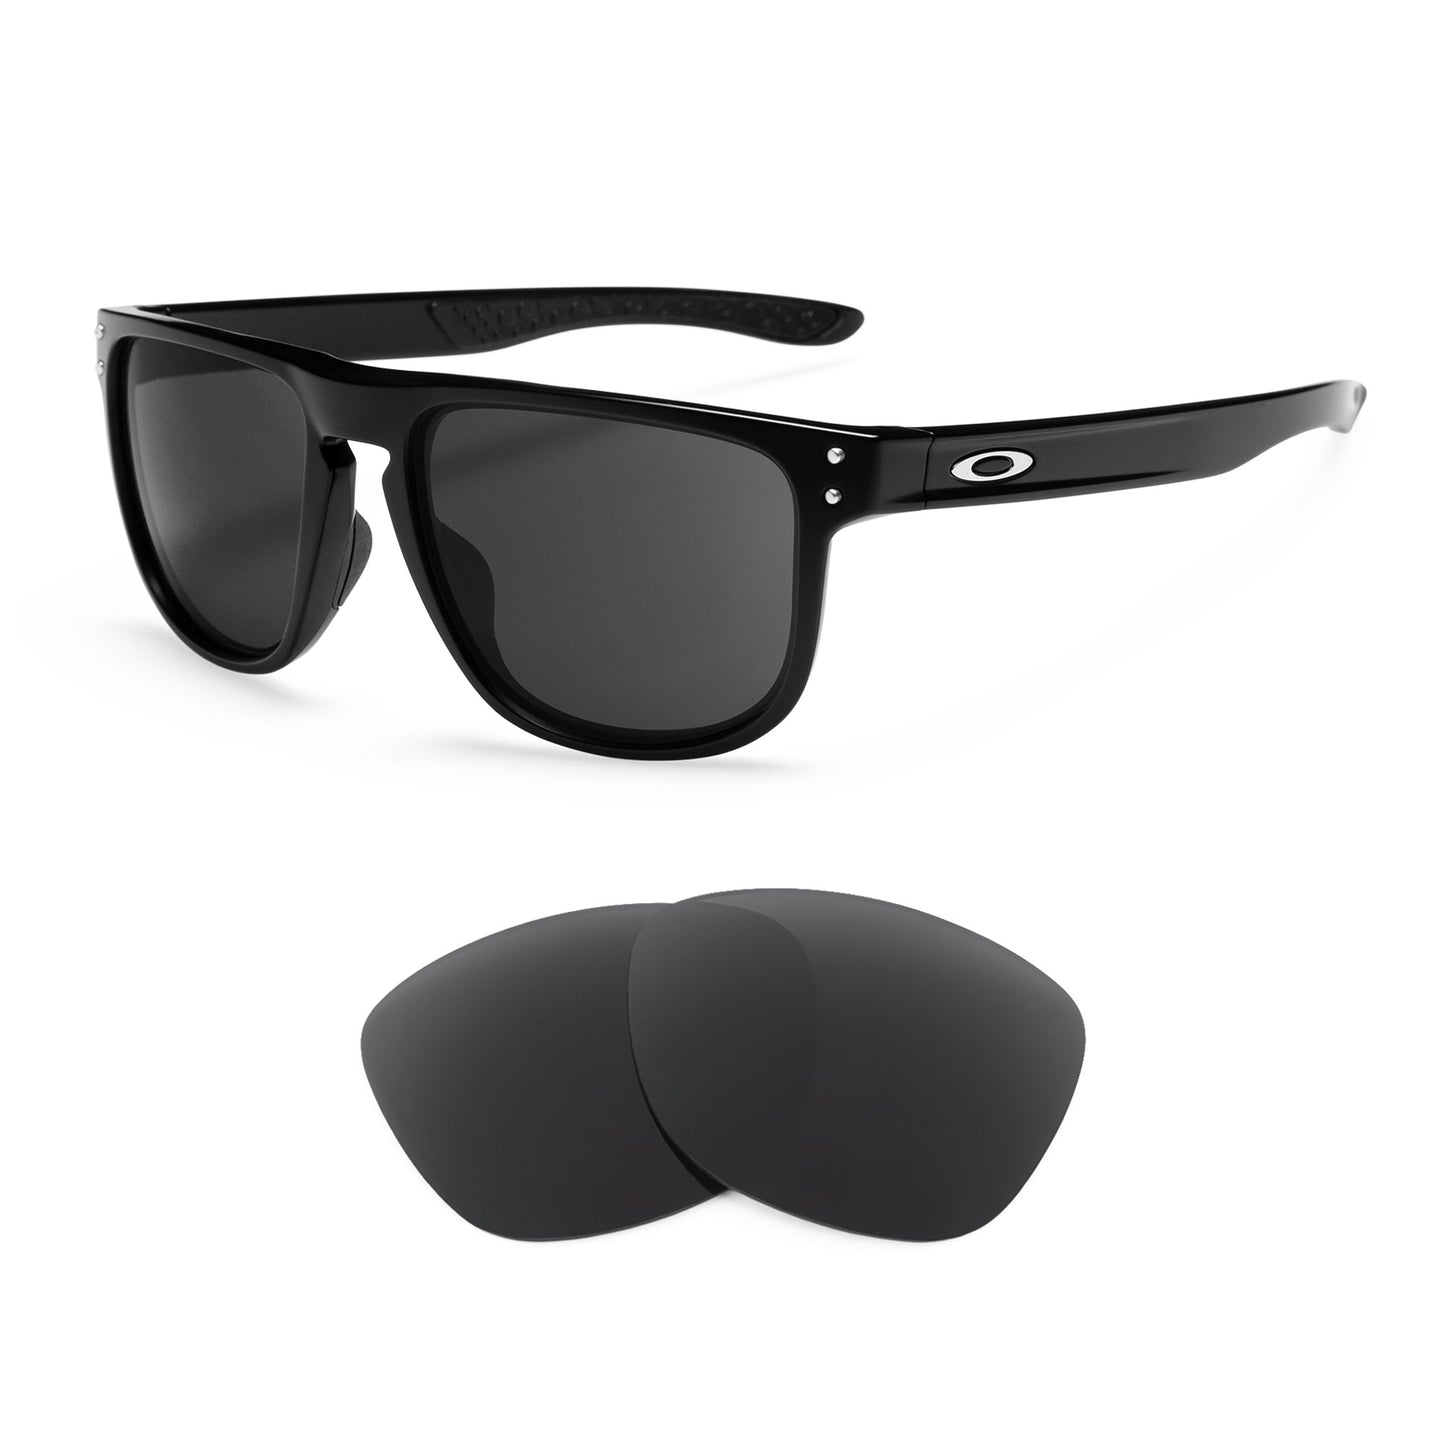 Oakley Holbrook R sunglasses with replacement lenses